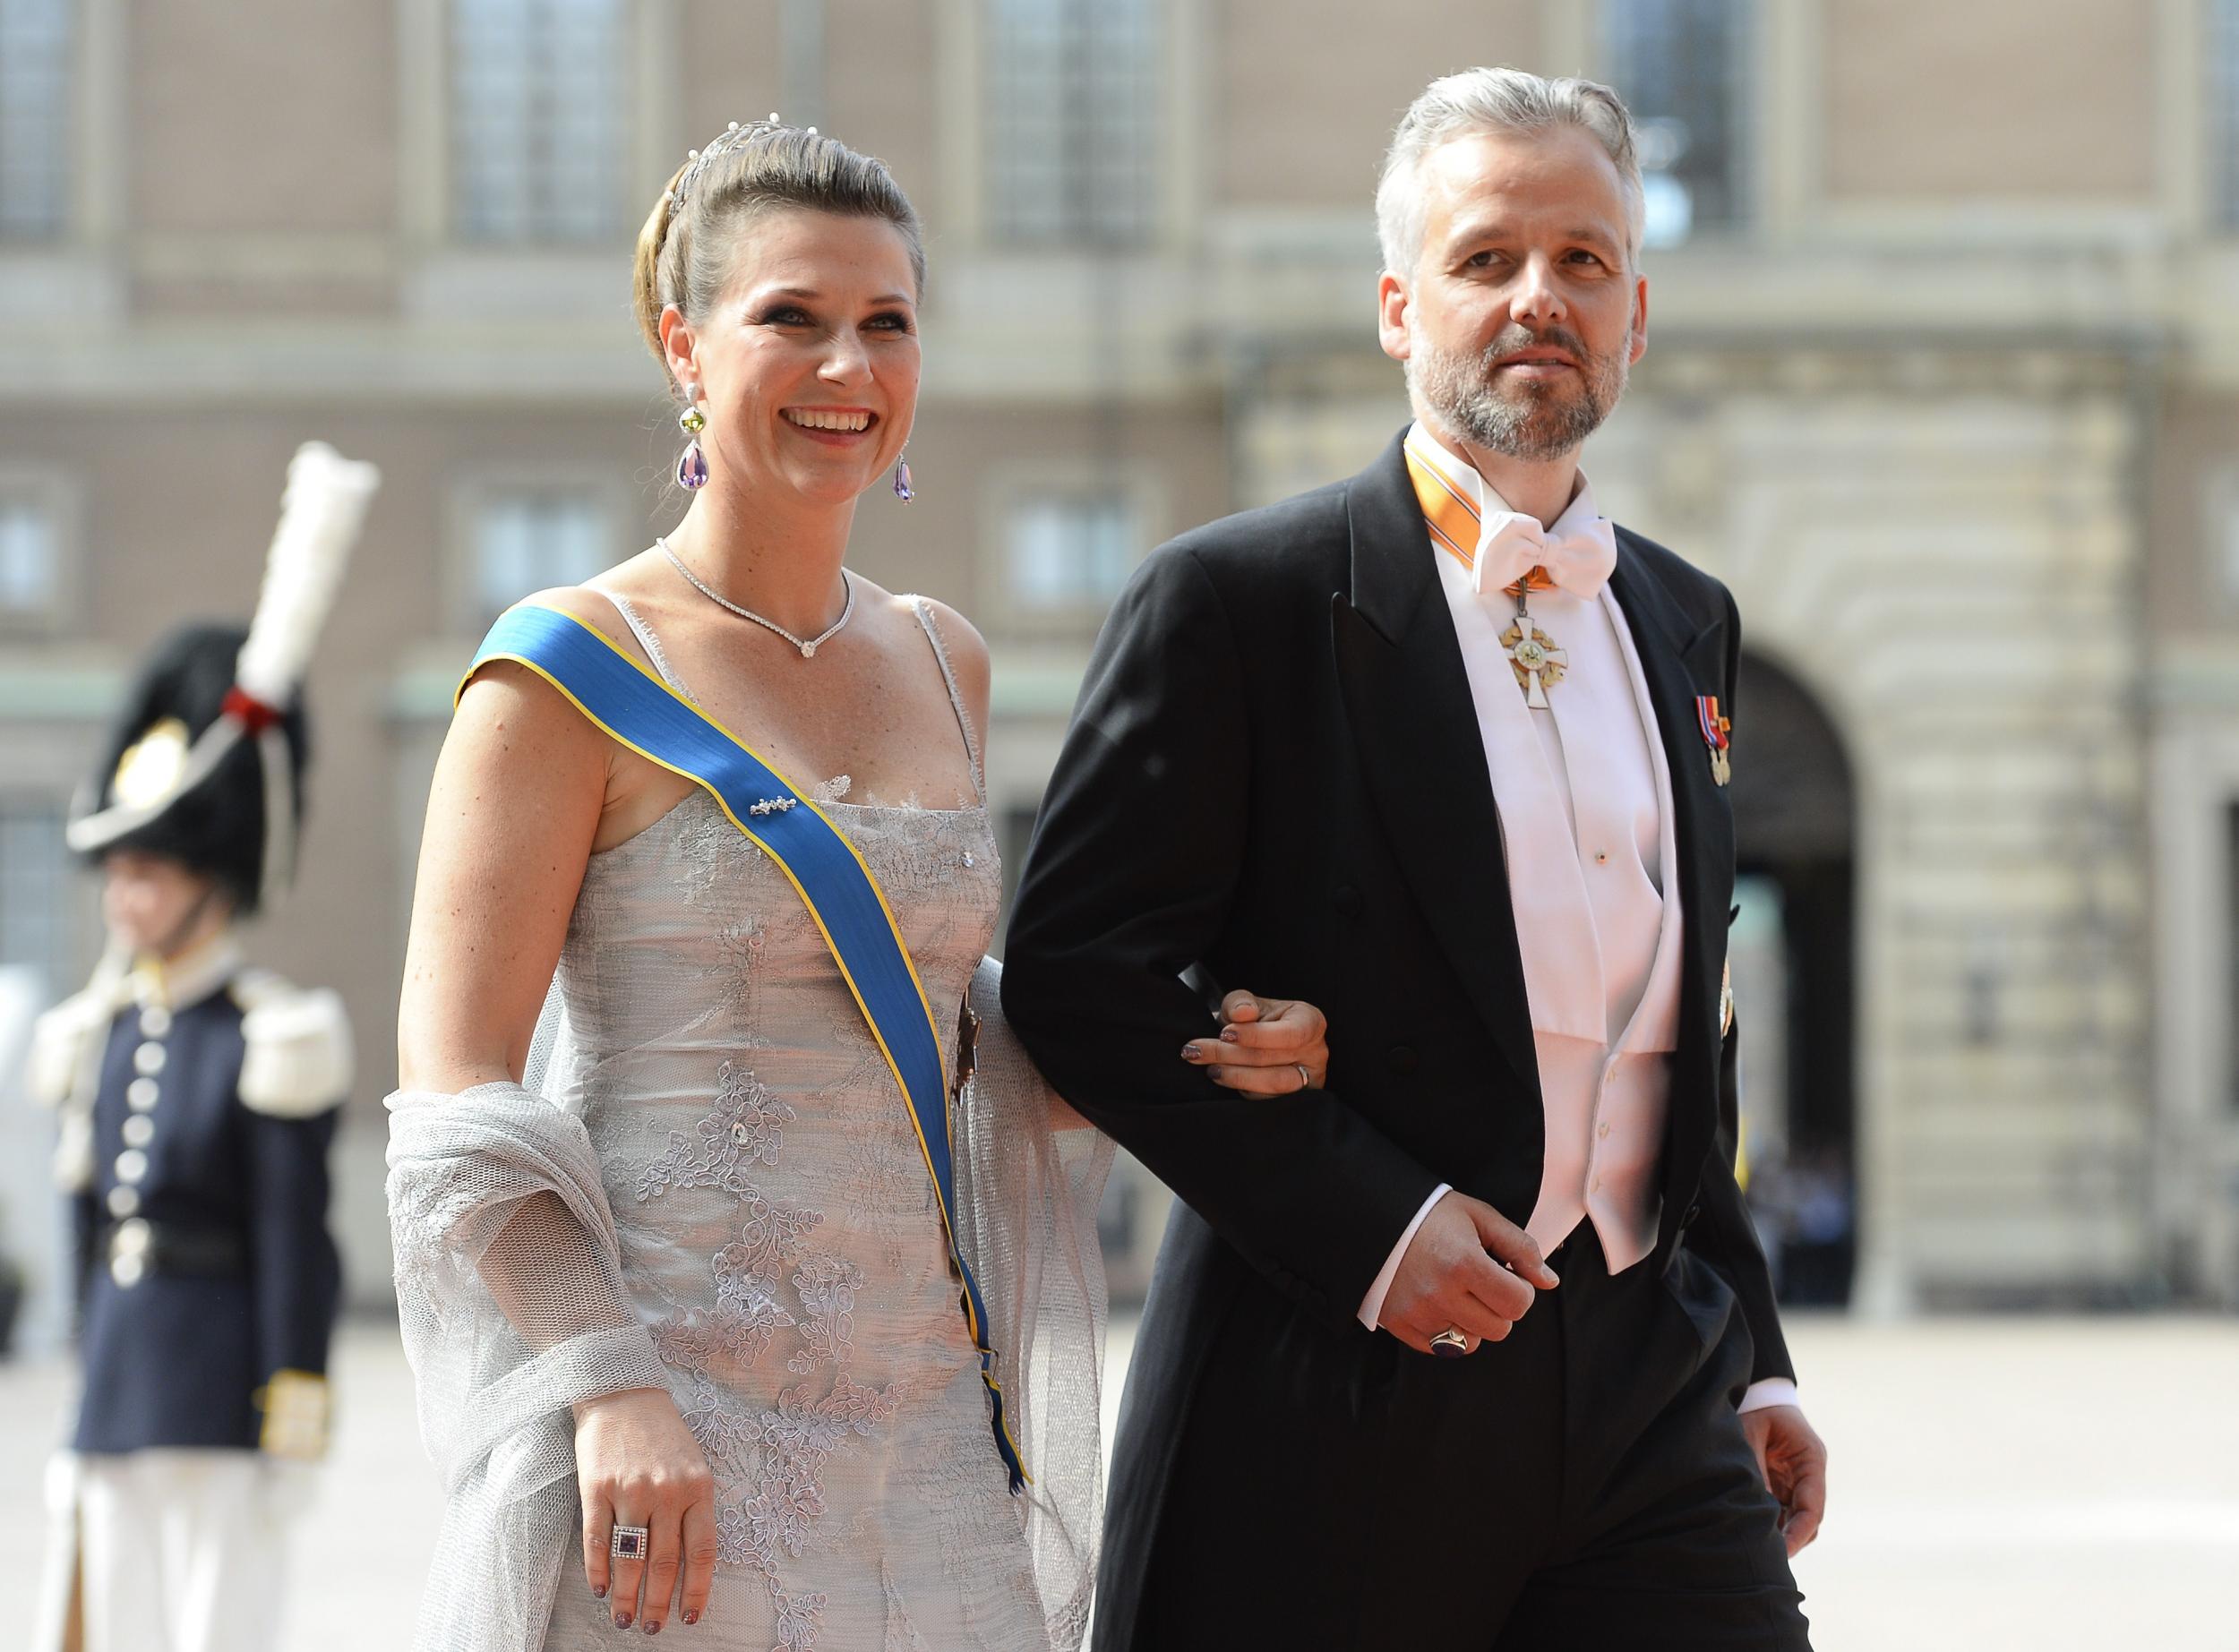 Ari Behn and his ex-wife, Princess Martha Louise, pictured in 2015